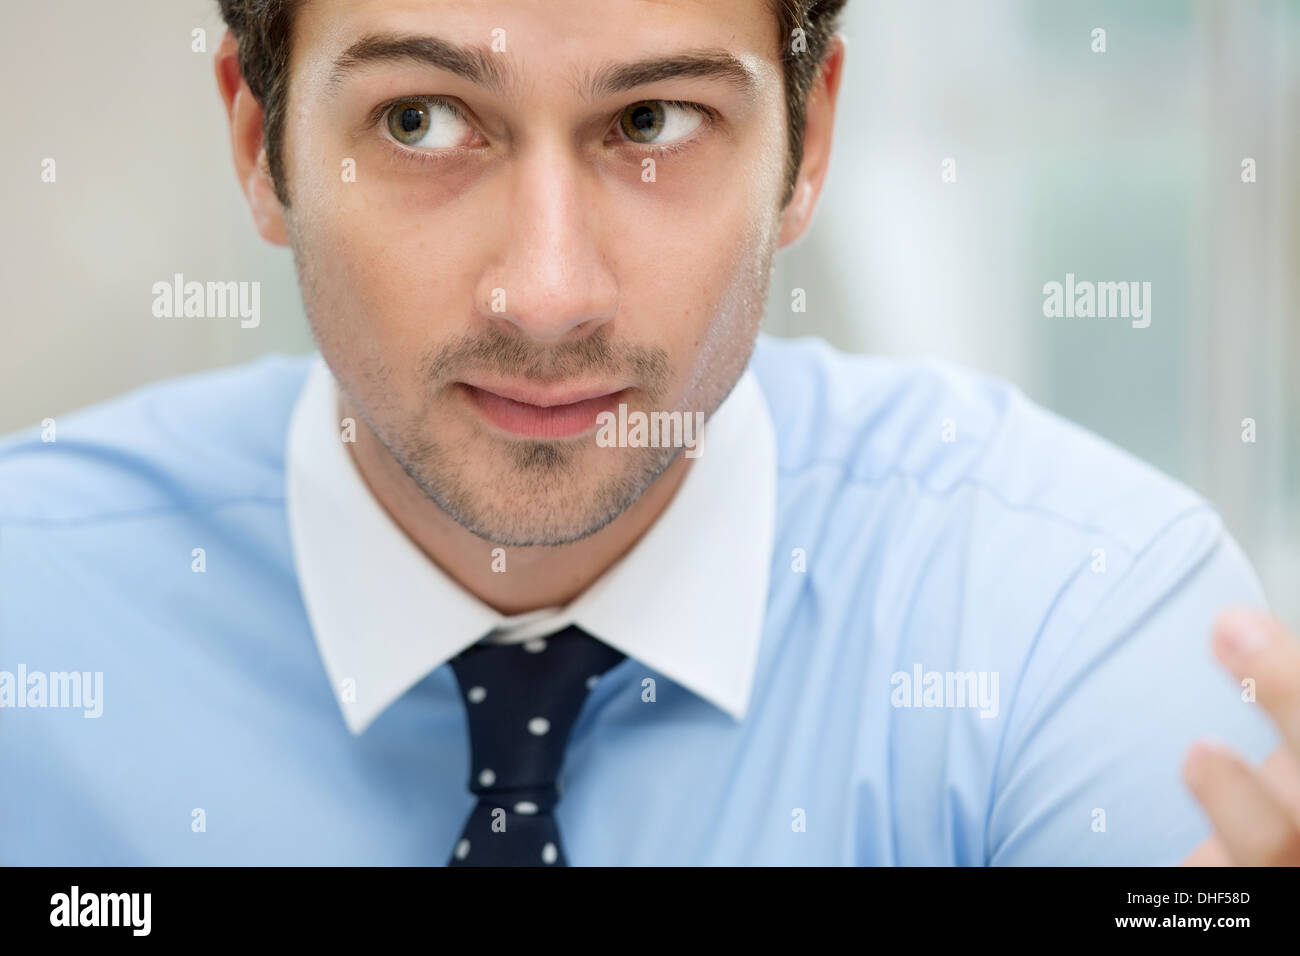 Young man looking away Stock Photo